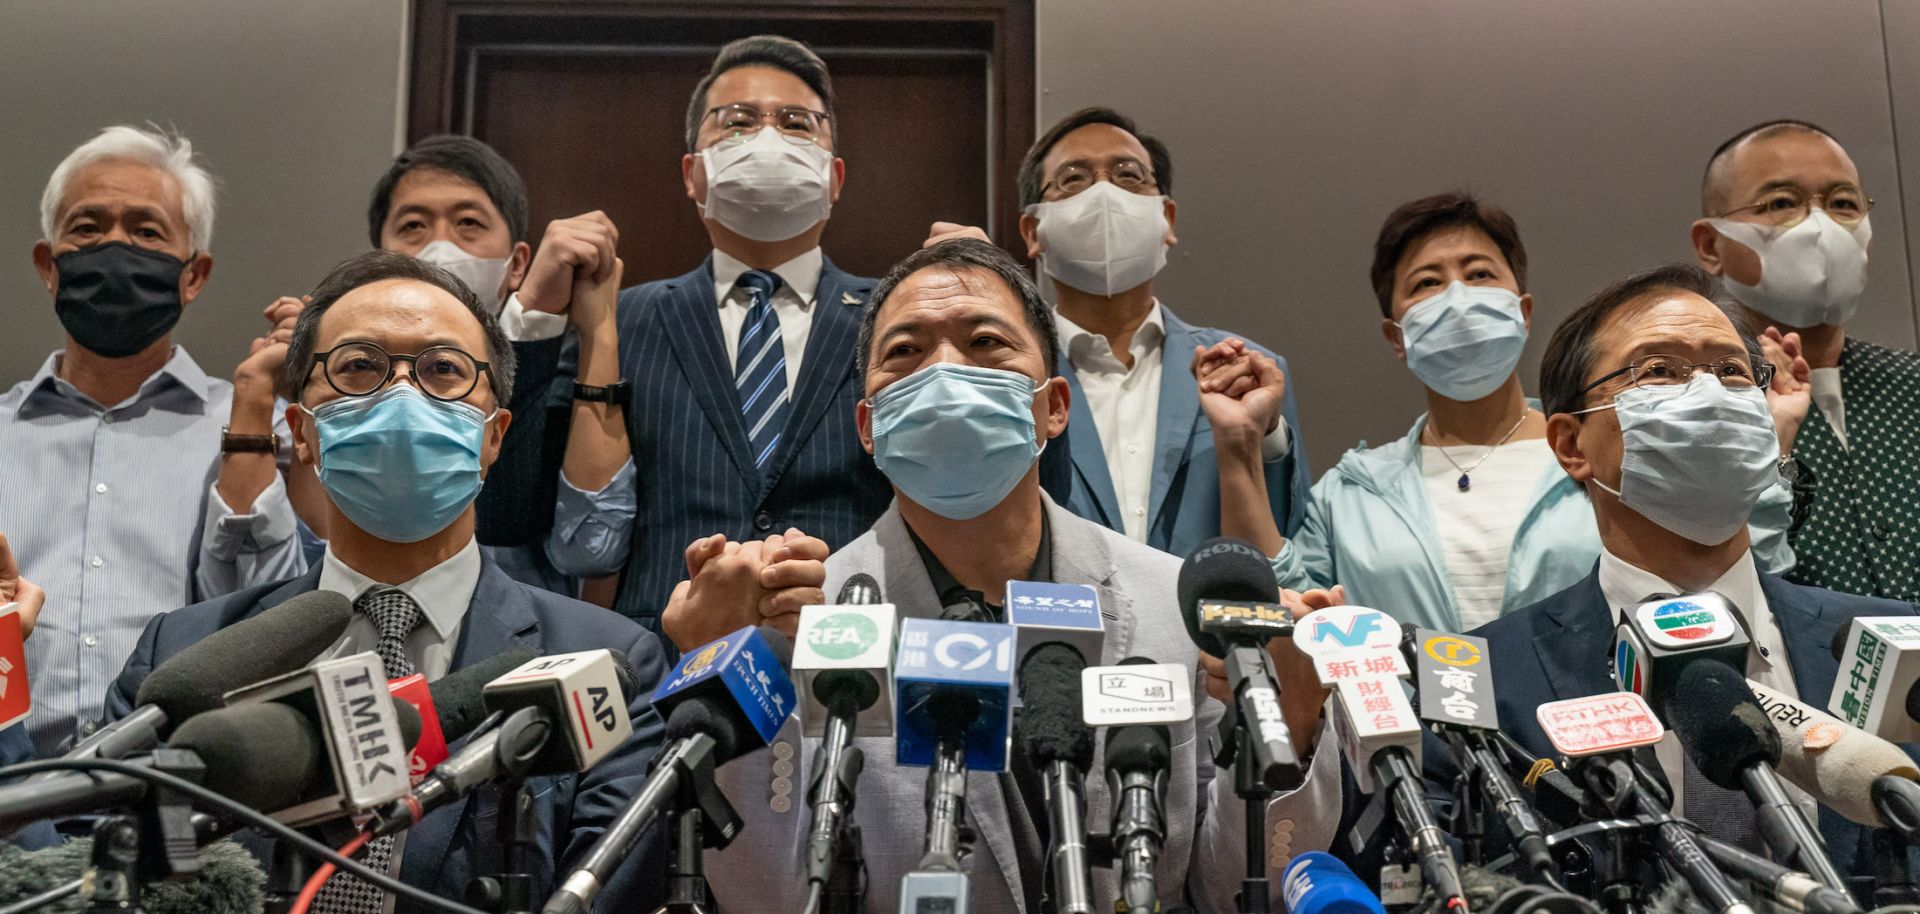 Pro-democracy lawmakers join hands during a press conference at Hong Kong’s Legislative Council after city officials ousted four of their colleagues on Nov. 11, 2020